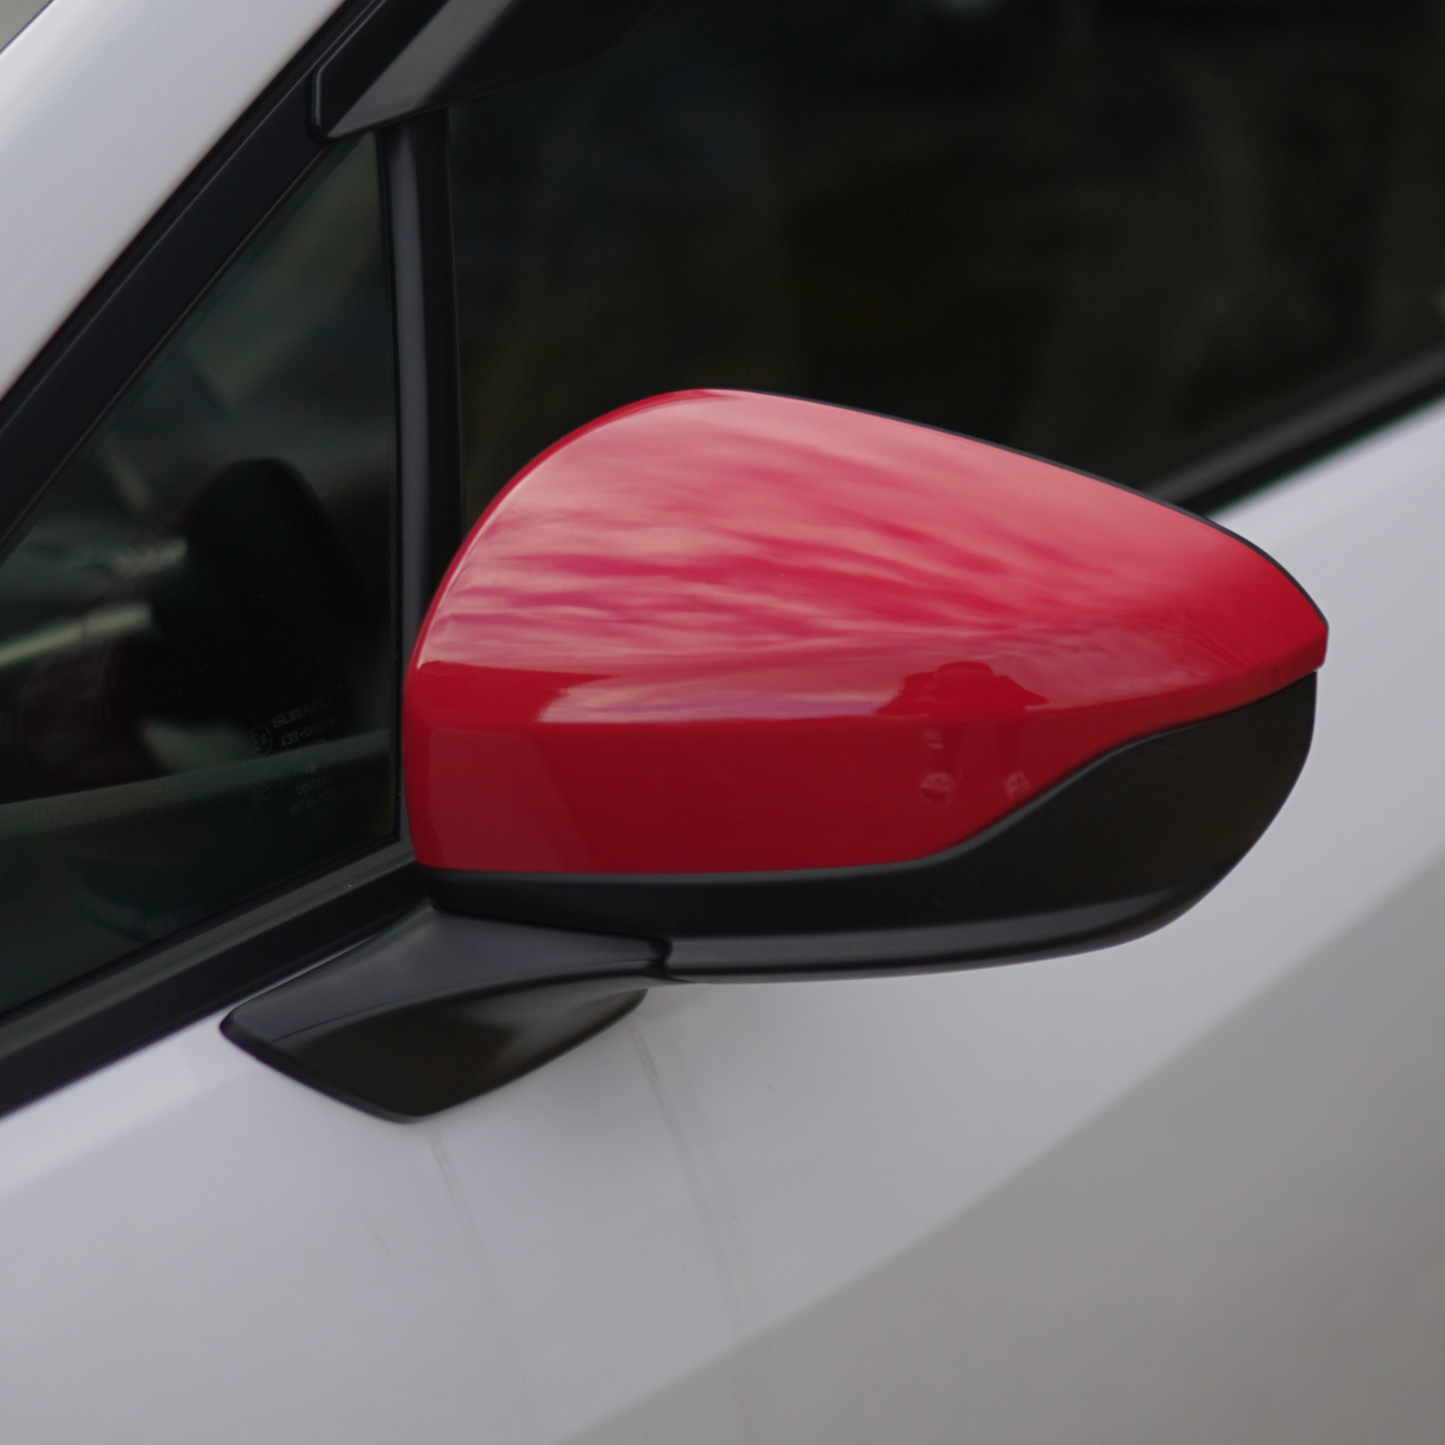 JDMuscle 2022-24 WRX 2PC Set Mirror Cover Replacements - Paint Matched / Gloss Black / Cherry Red